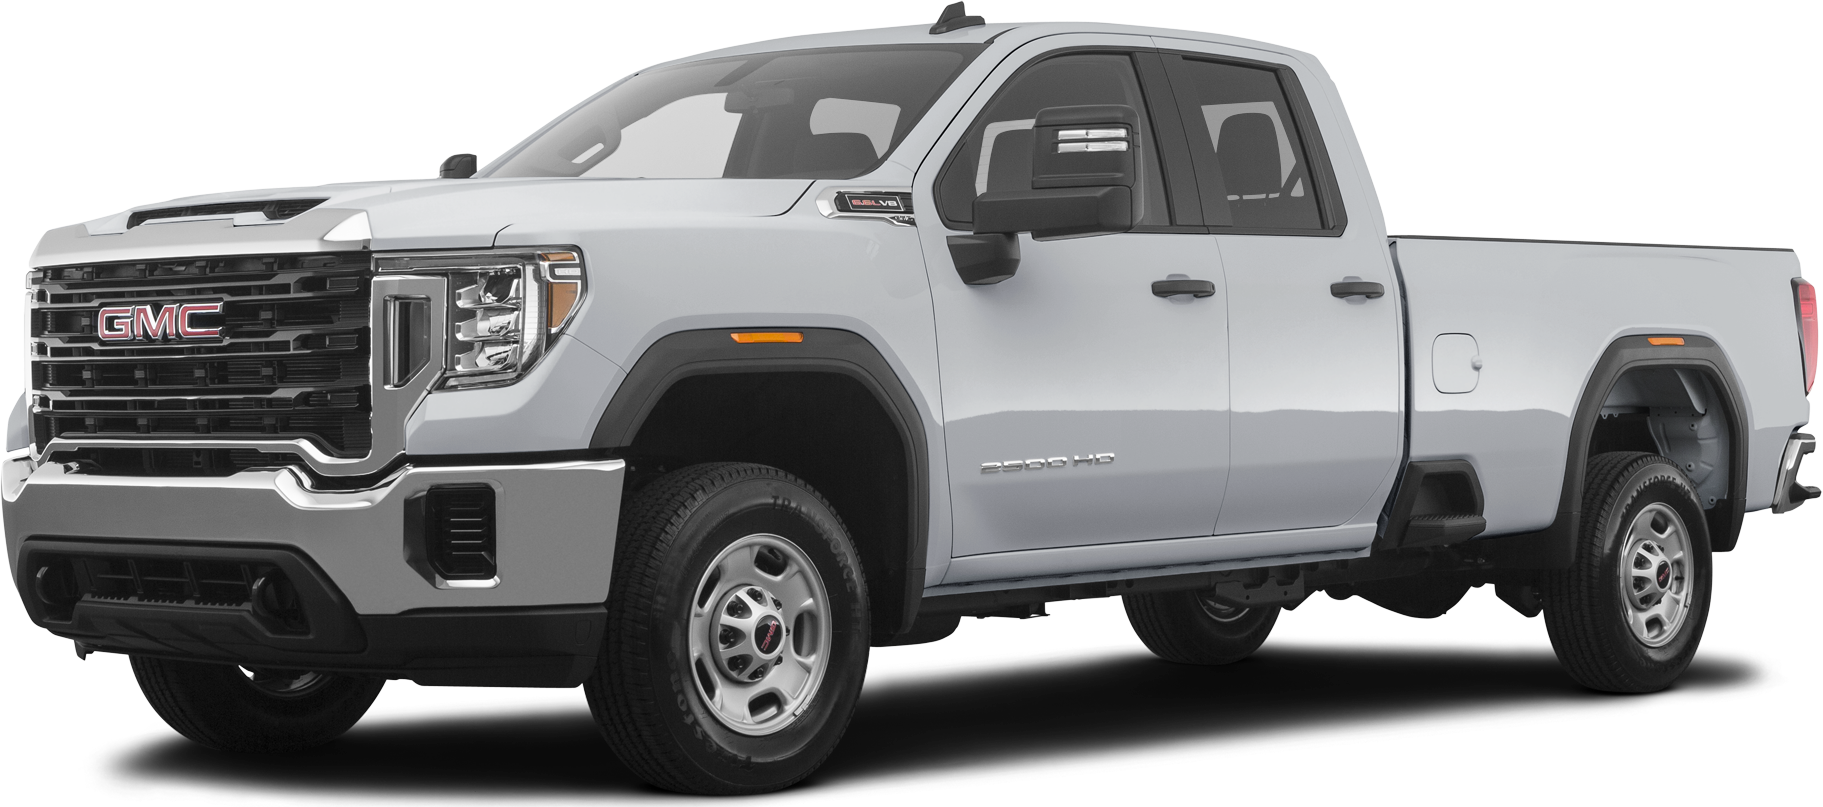 2020 Gmc Sierra 2500 Hd Double Cab Values And Cars For Sale Kelley Blue